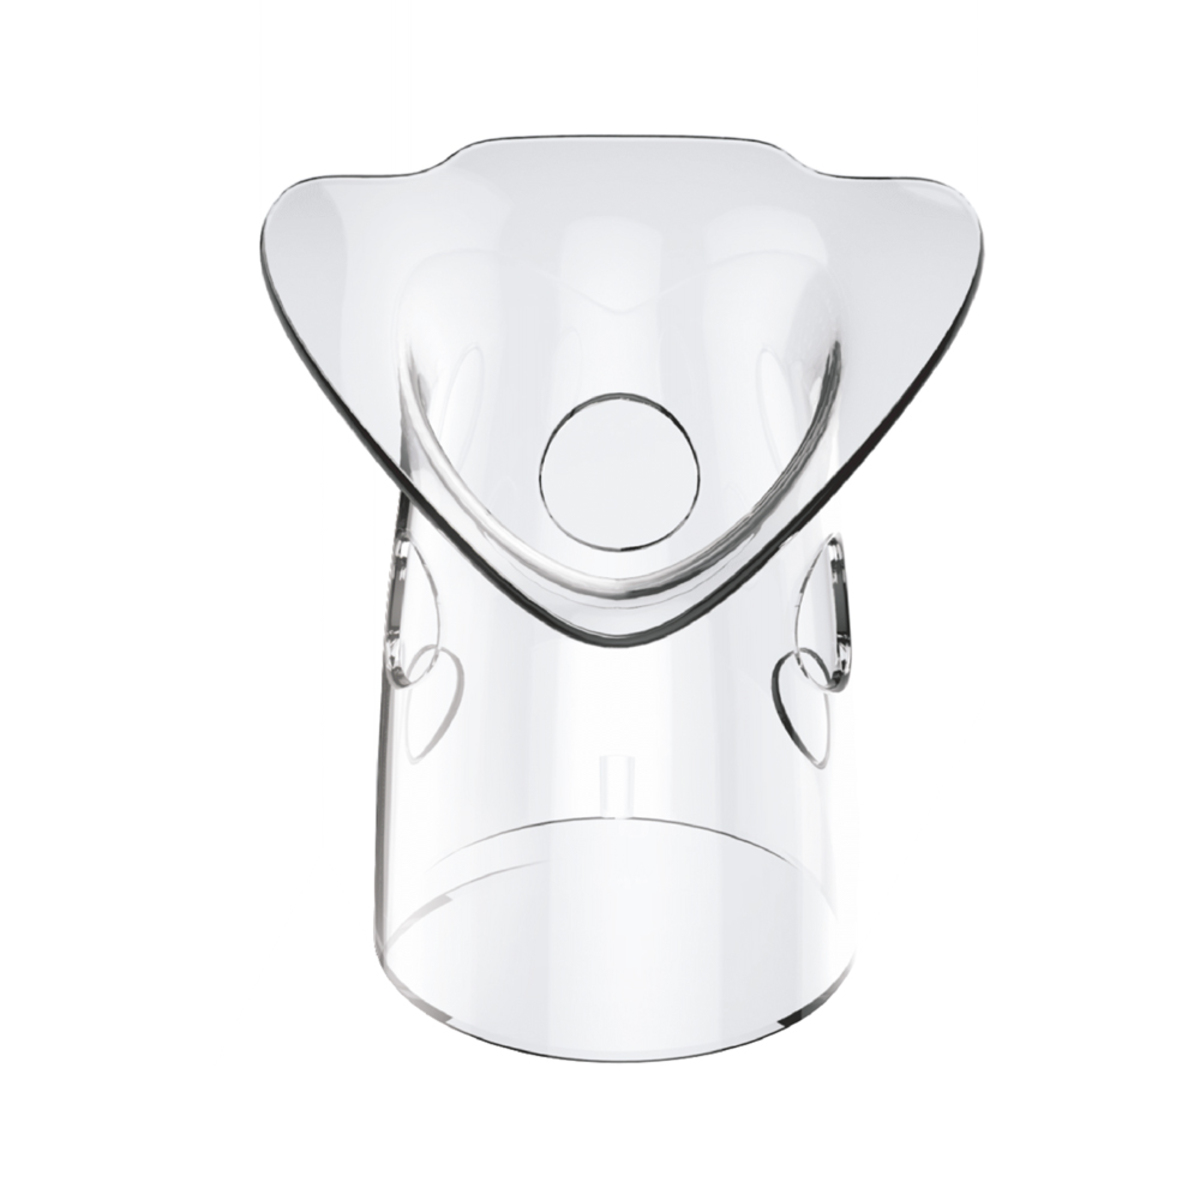 Impex FS 1401 Facial Steamer with Deep Hydration